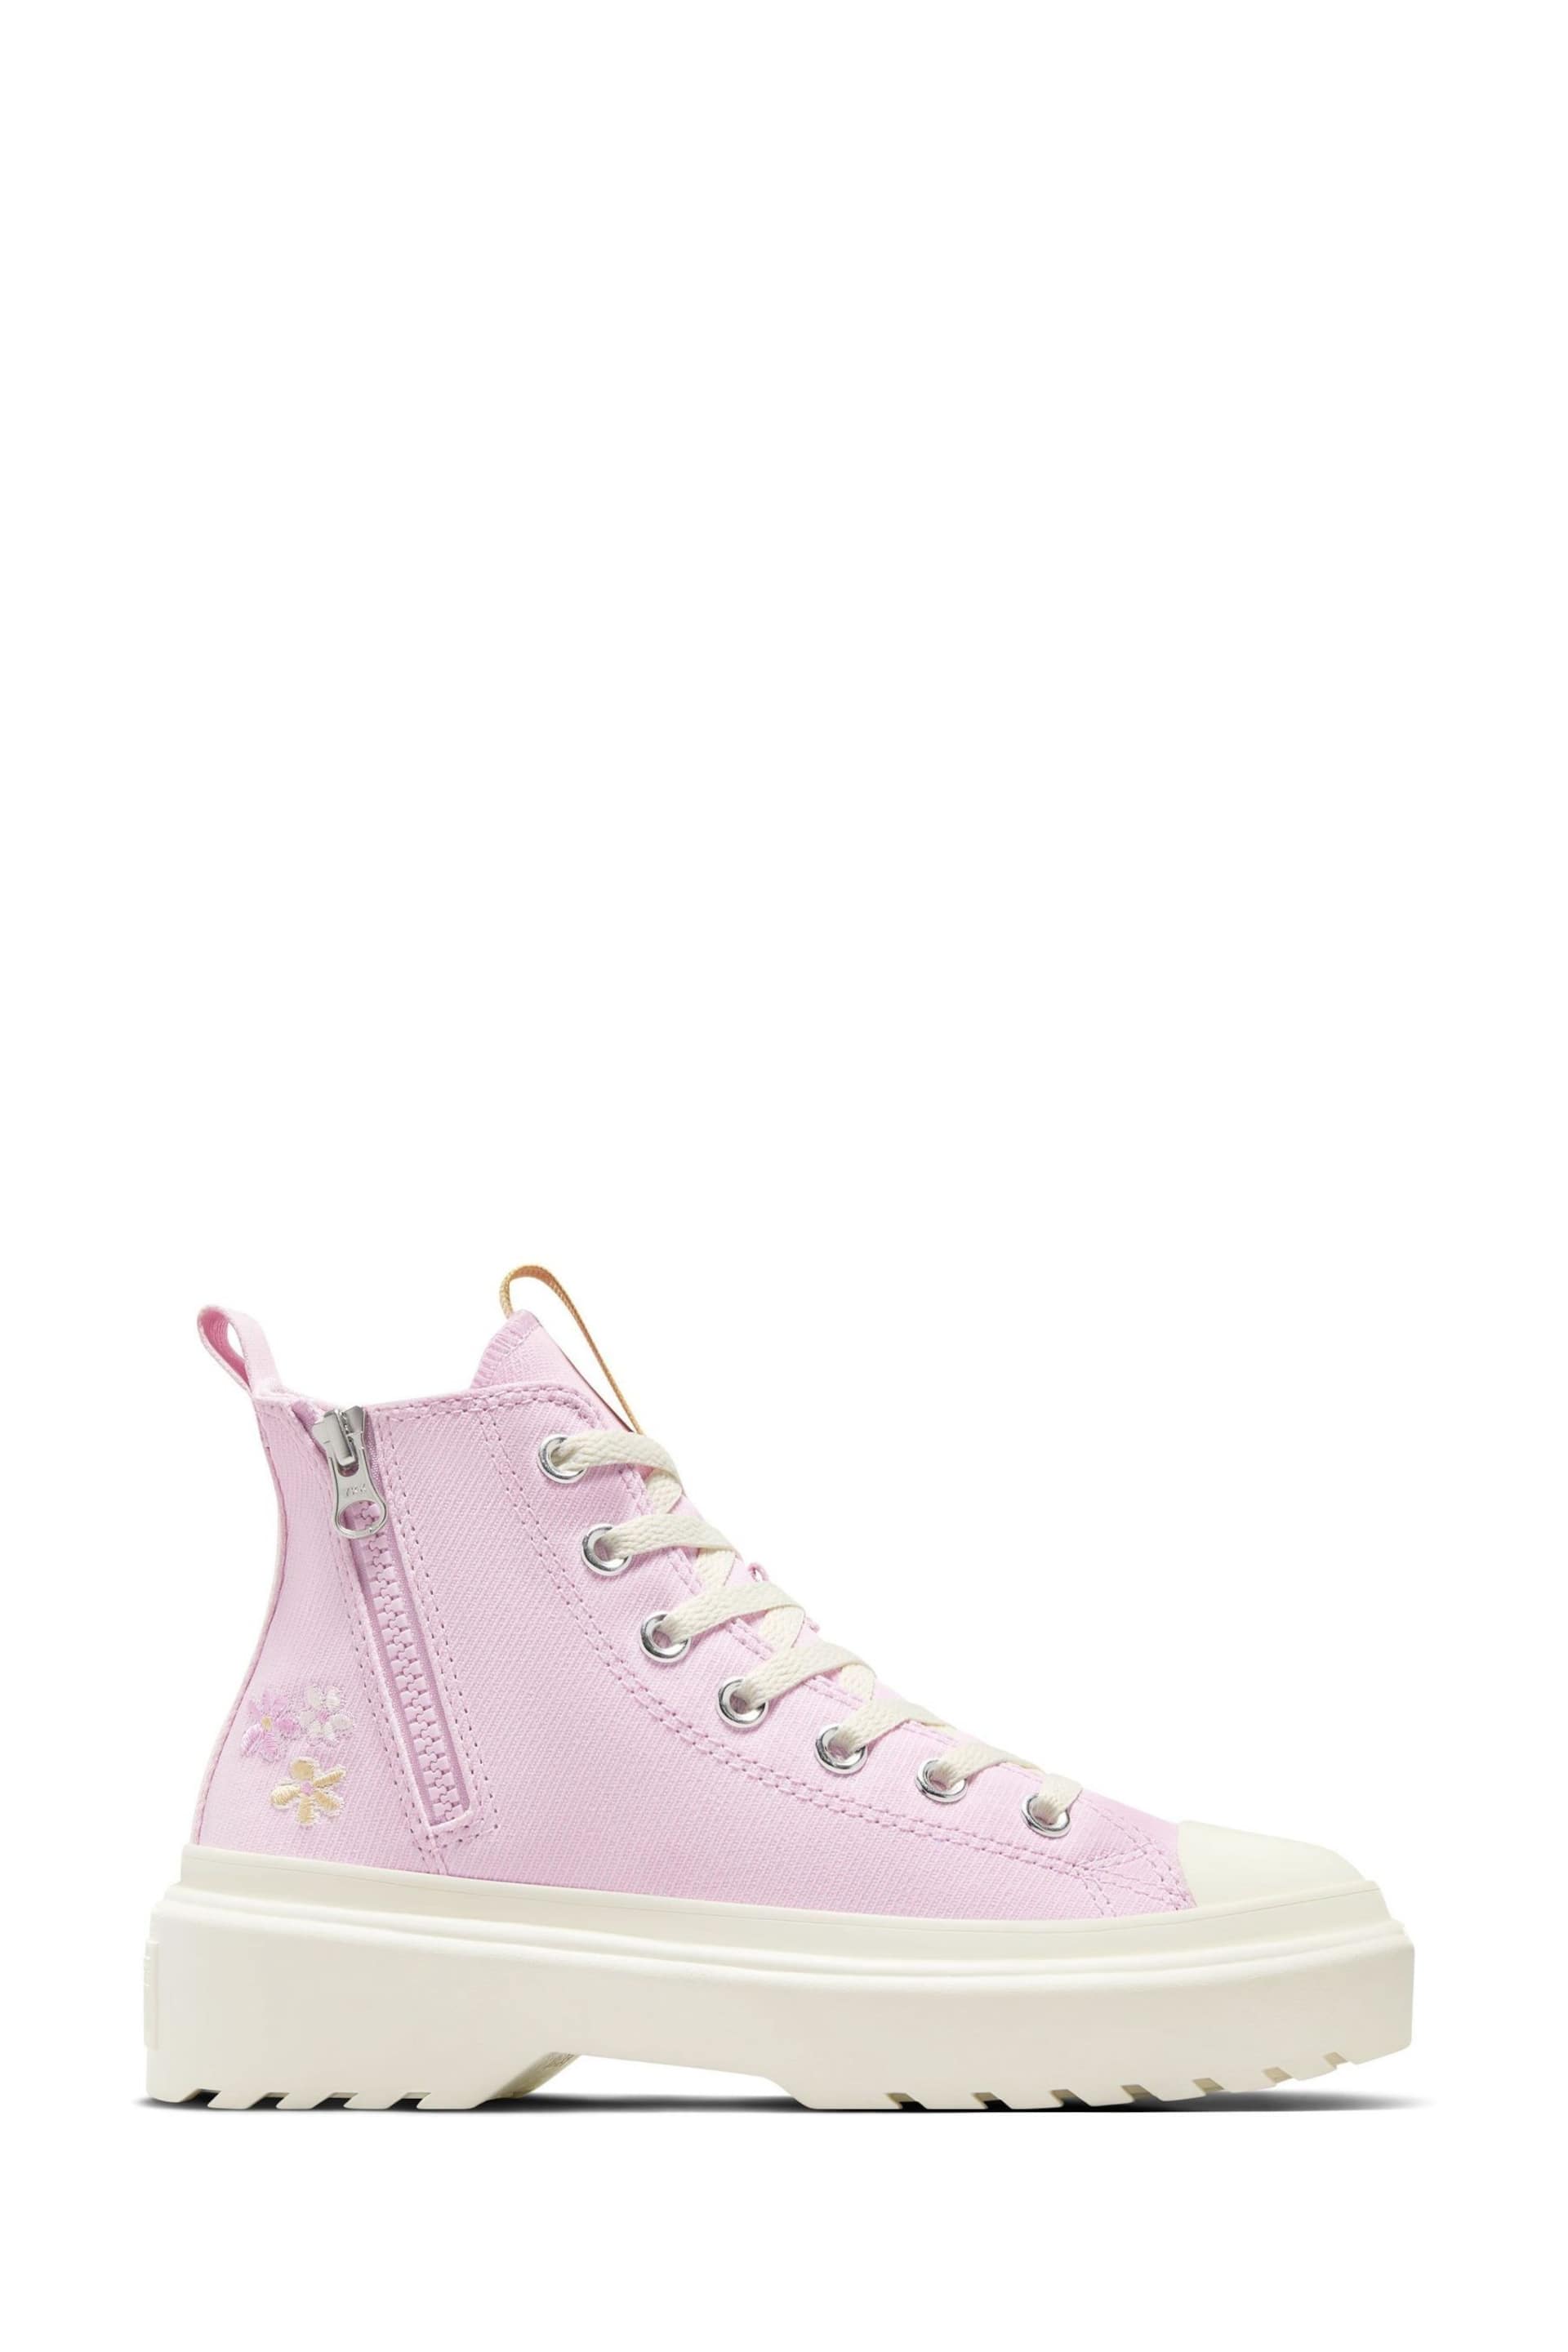 Converse Purple Chuck Taylor Flower Embroidered Lugged Lift Junior Trainers - Image 3 of 12